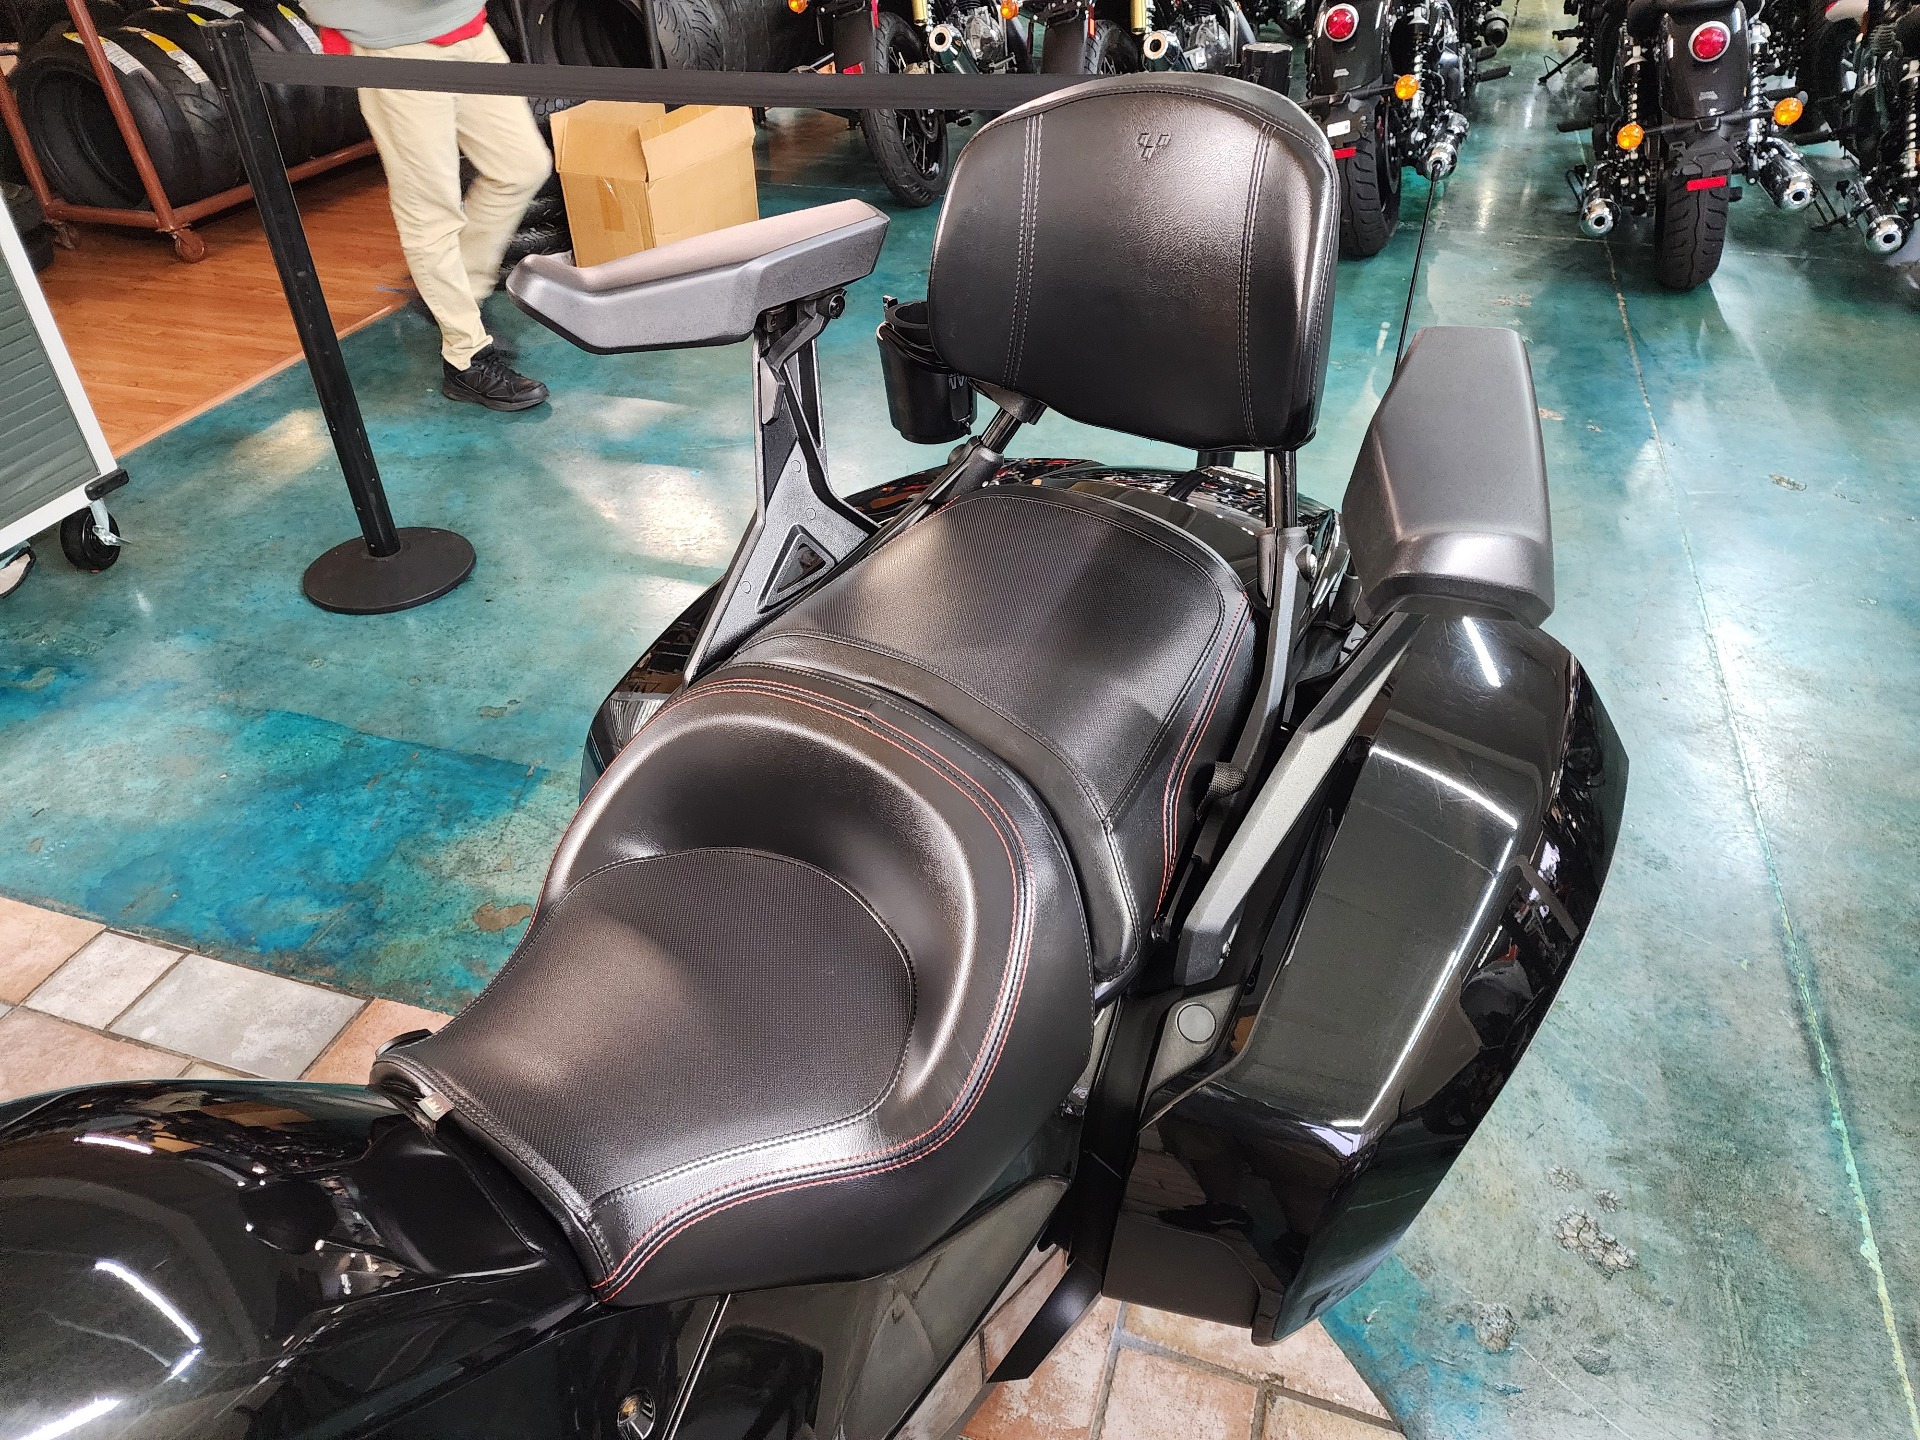 2016 Can-Am Spyder F3-T SE6 w/ Audio System in Louisville, Tennessee - Photo 6